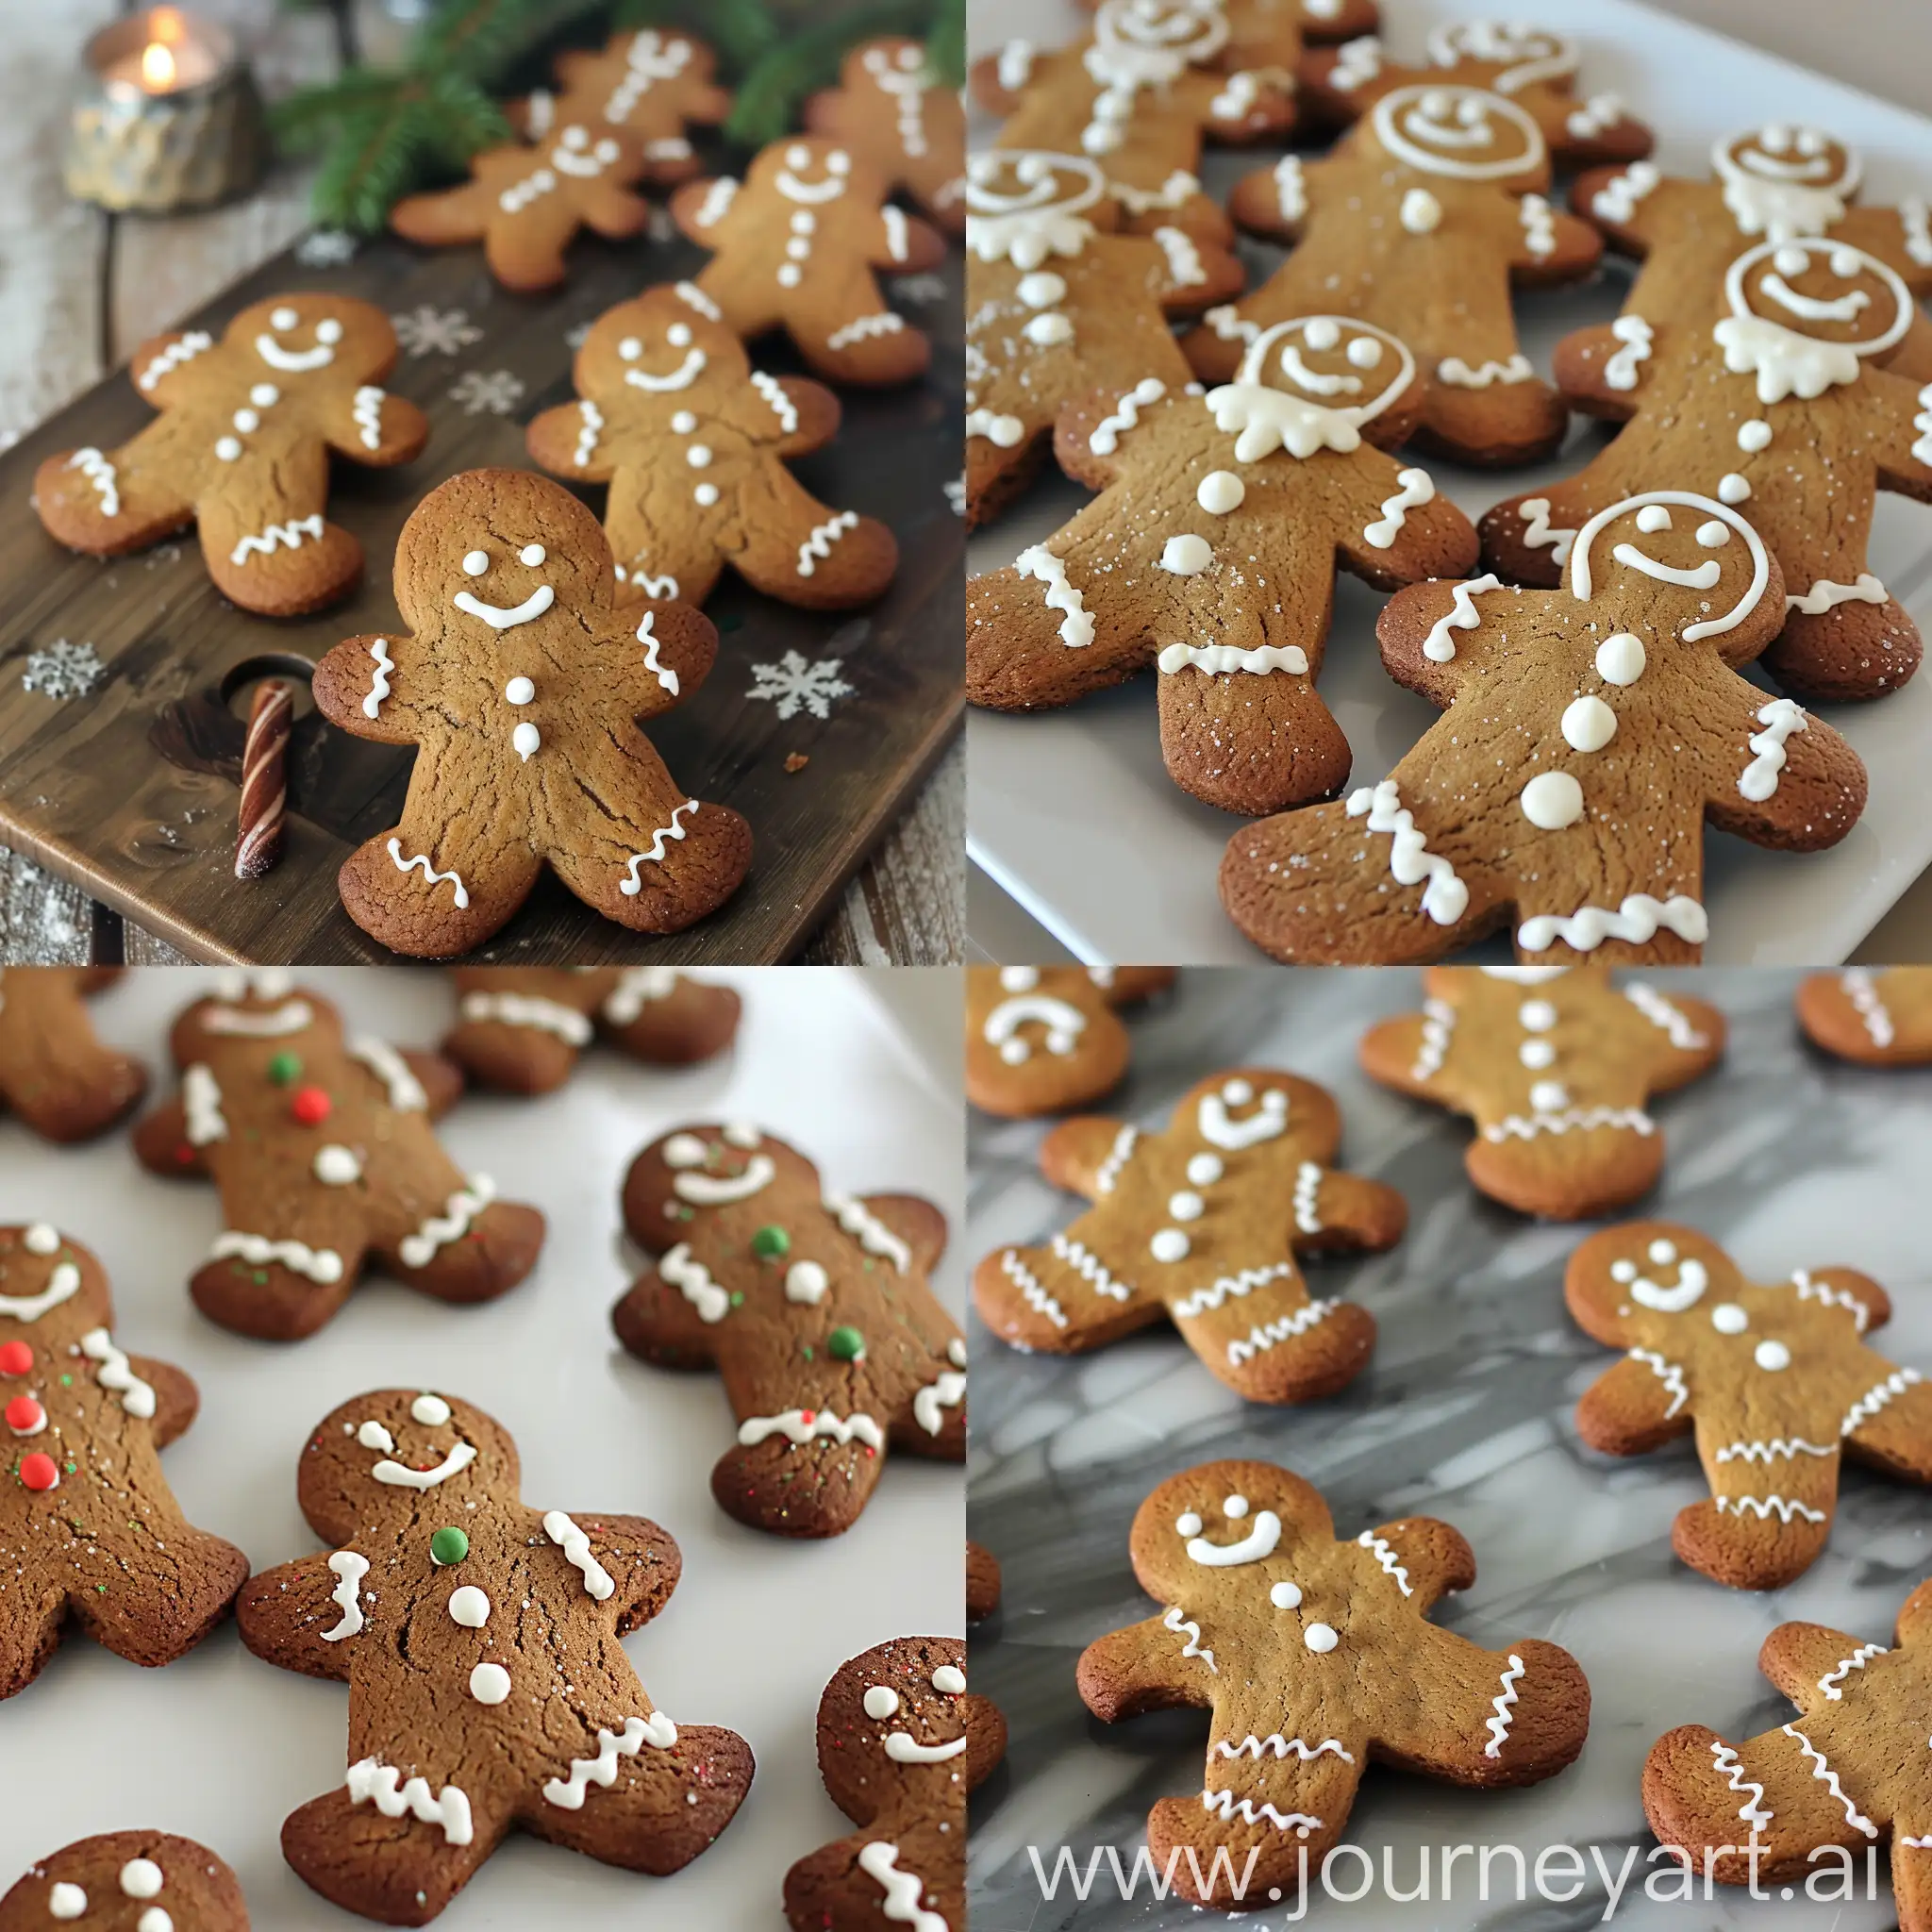 Colorful-Gingerbread-Man-Art-Vibrant-Holiday-Cookie-Character